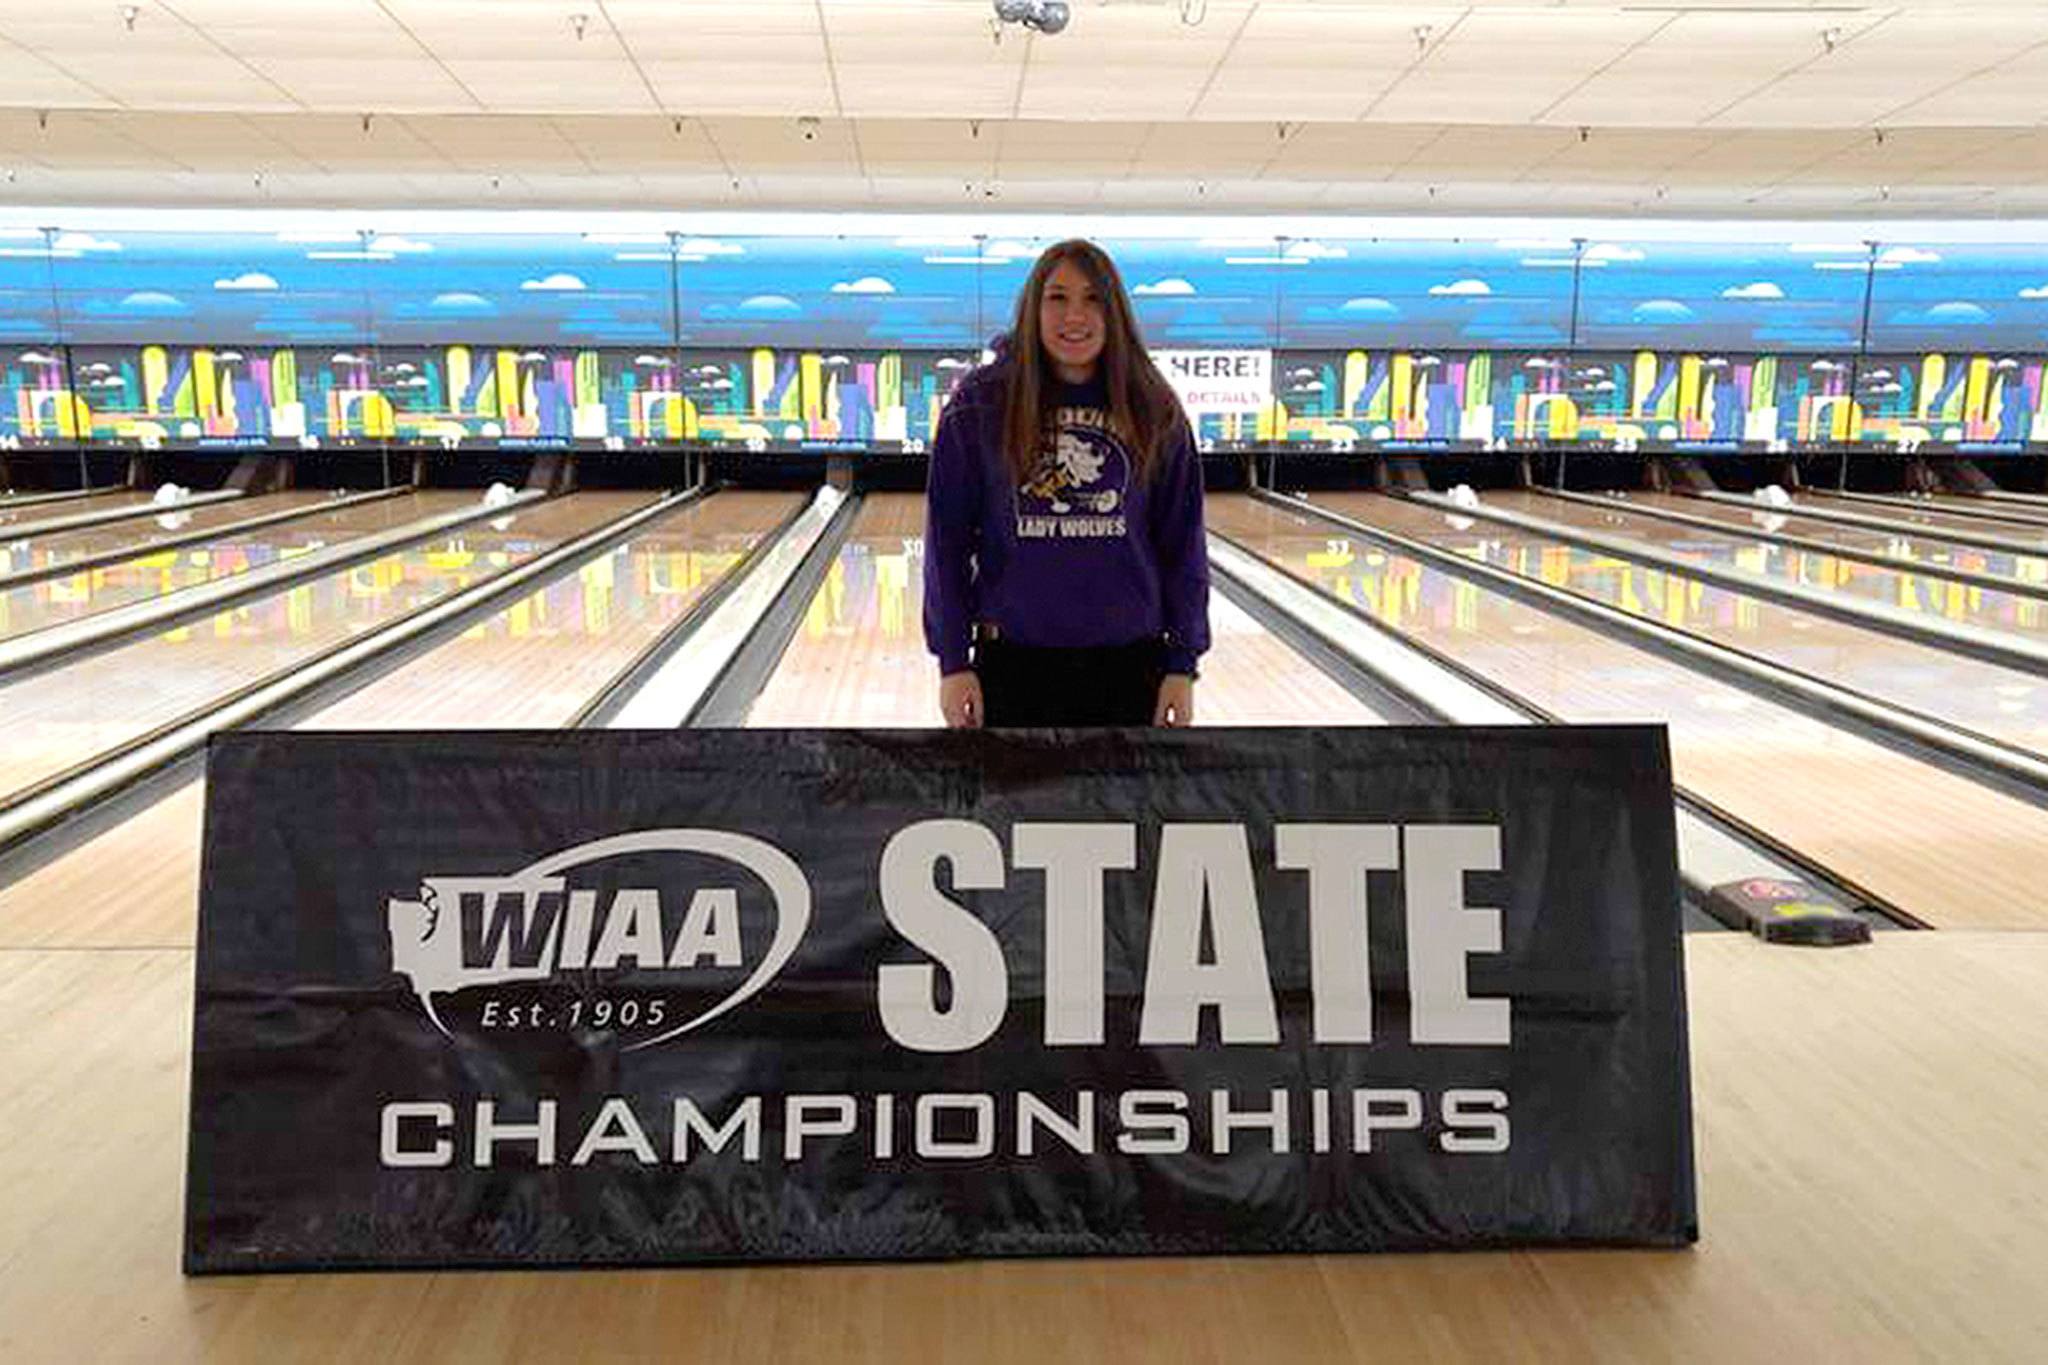 Destiny Staus stands in Narrows Plaza Bowl before the 1A/2A state bowling tournament last weekend. She’s the first Sequim bowler to compete at state since 2011. Photo courtesy of Randy Perry